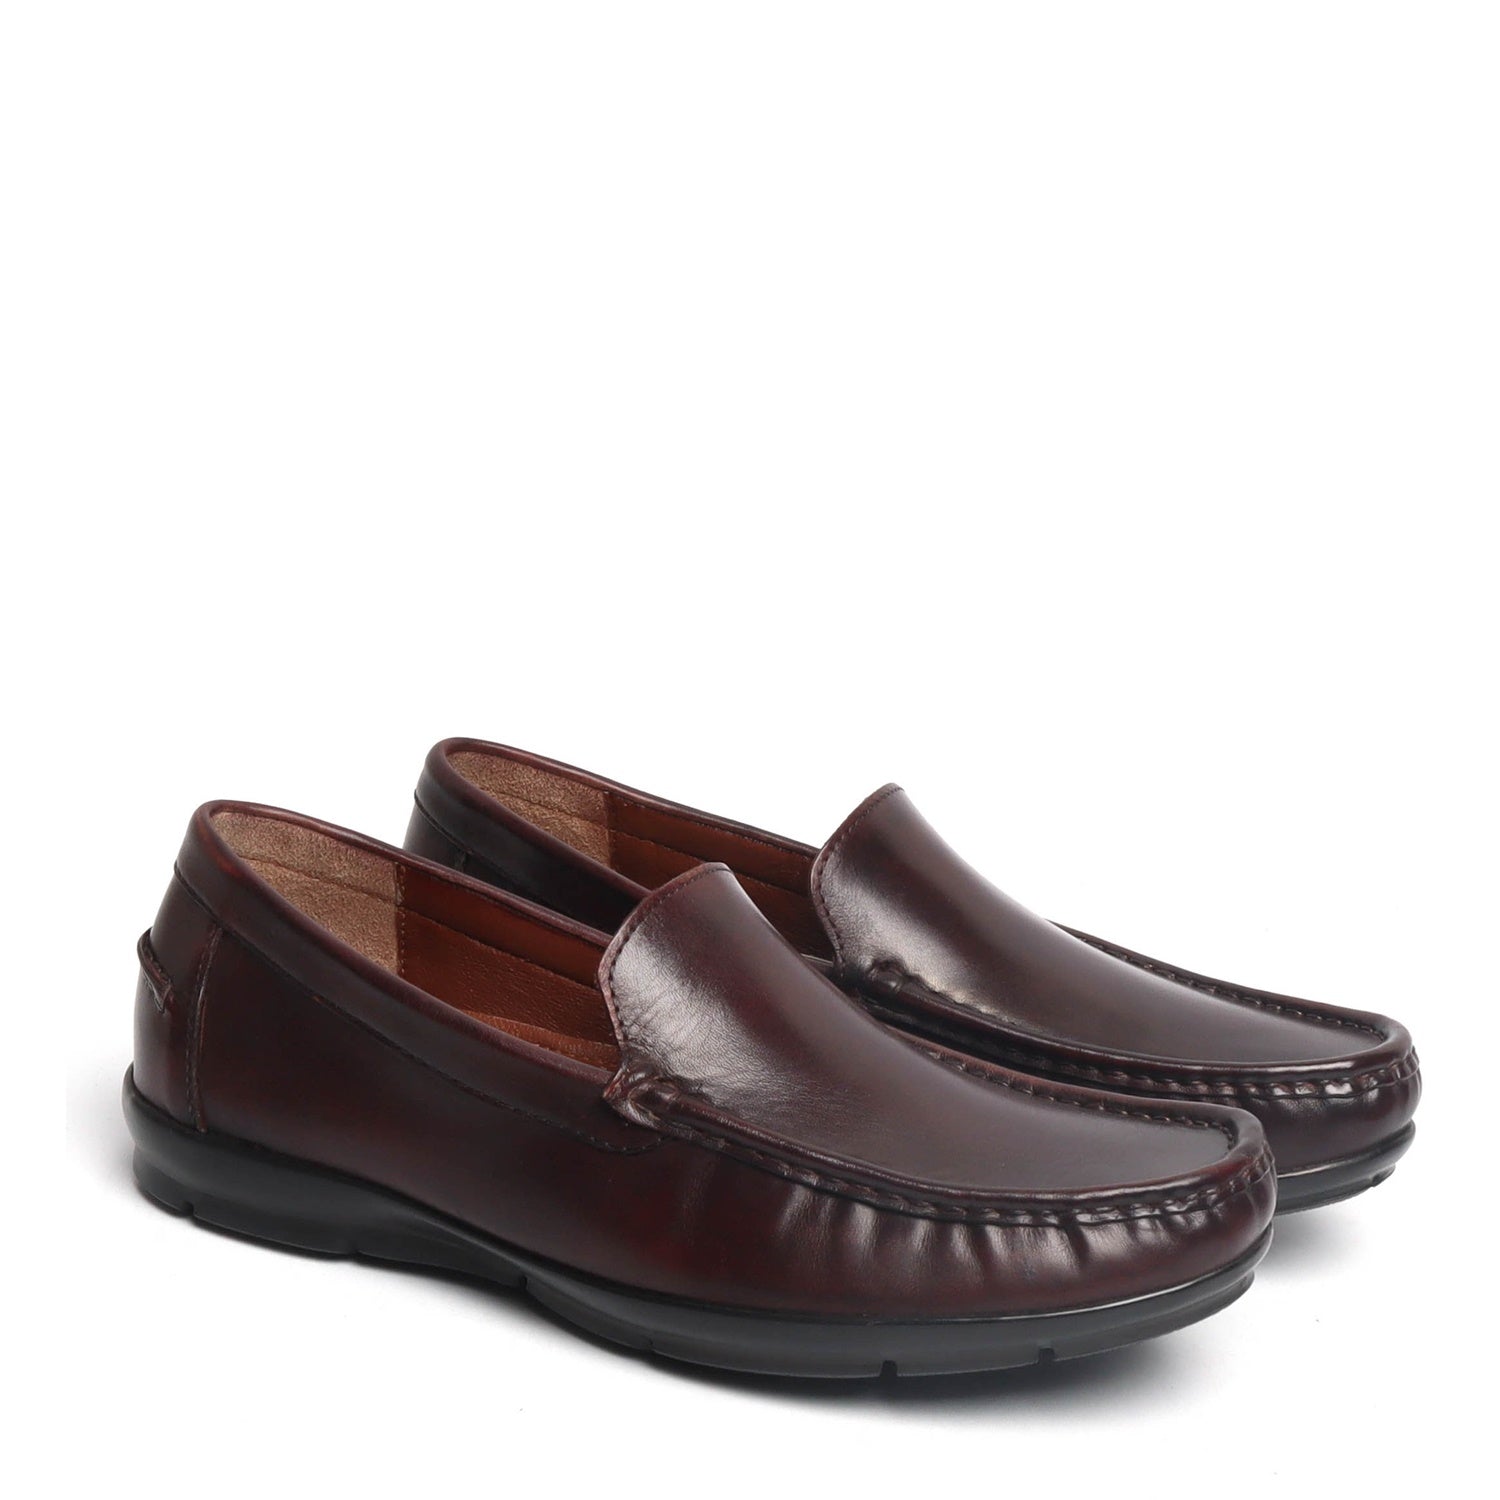 Light Weight Super Flexible Loafers in Dark Brown Leather